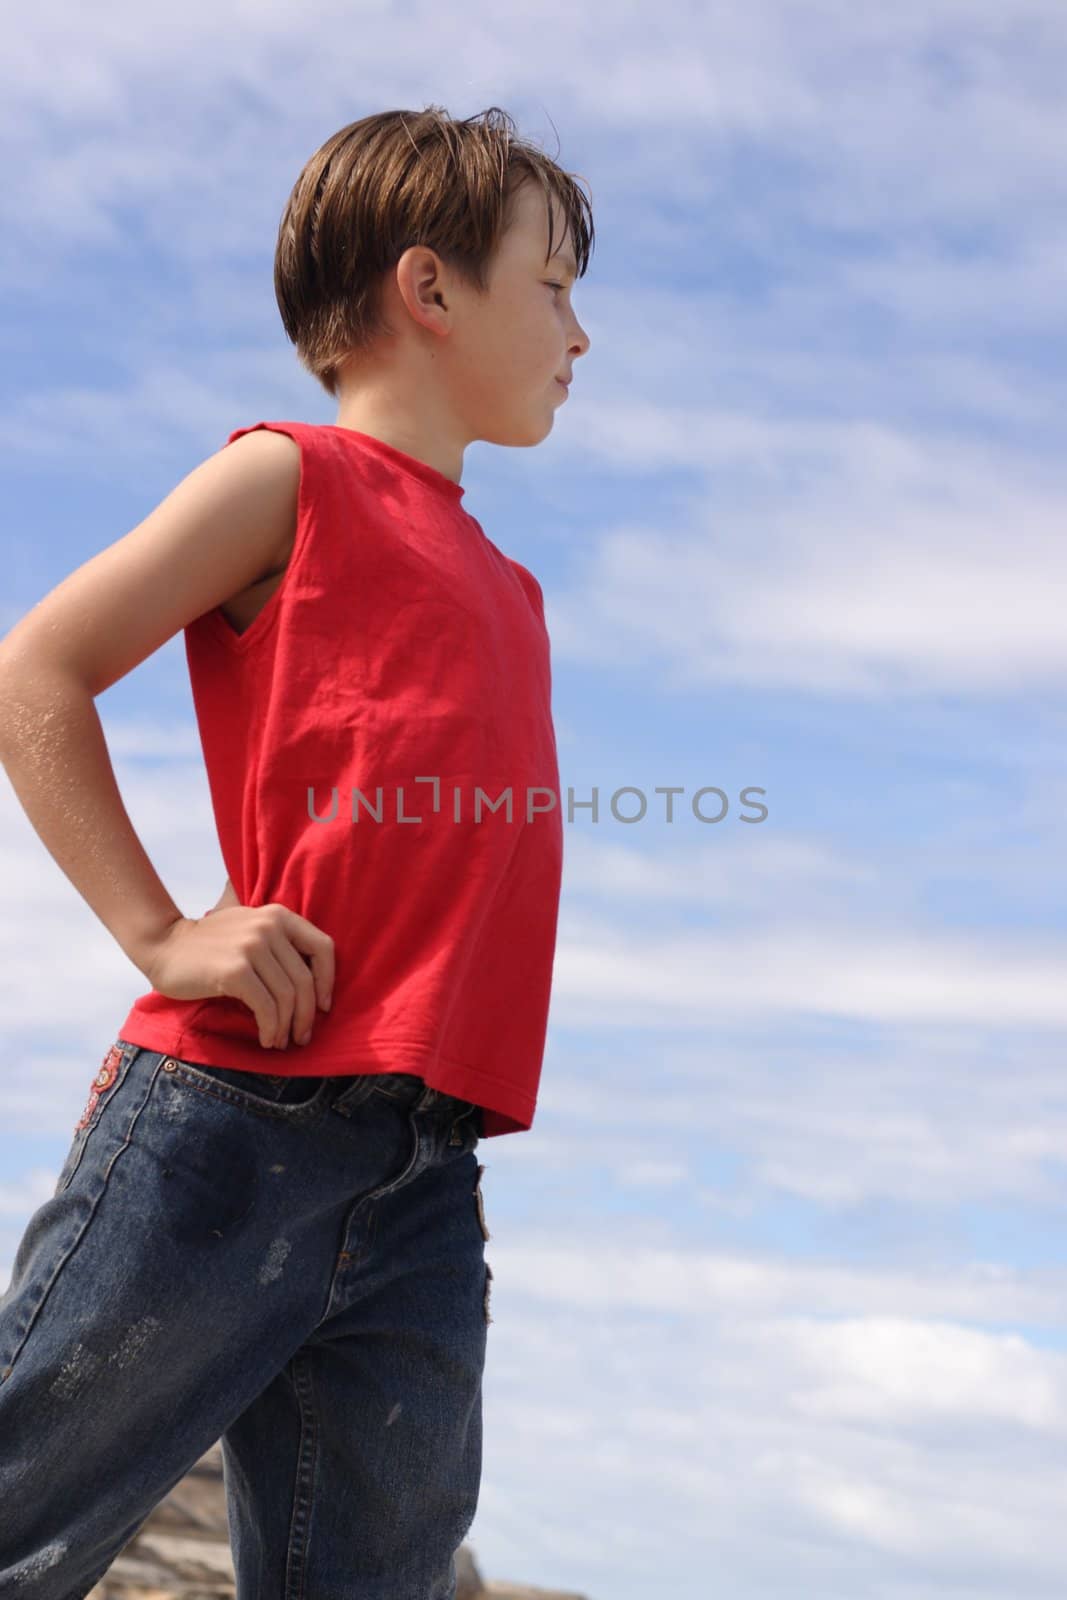 A boy stands hands on hips against a blue sky